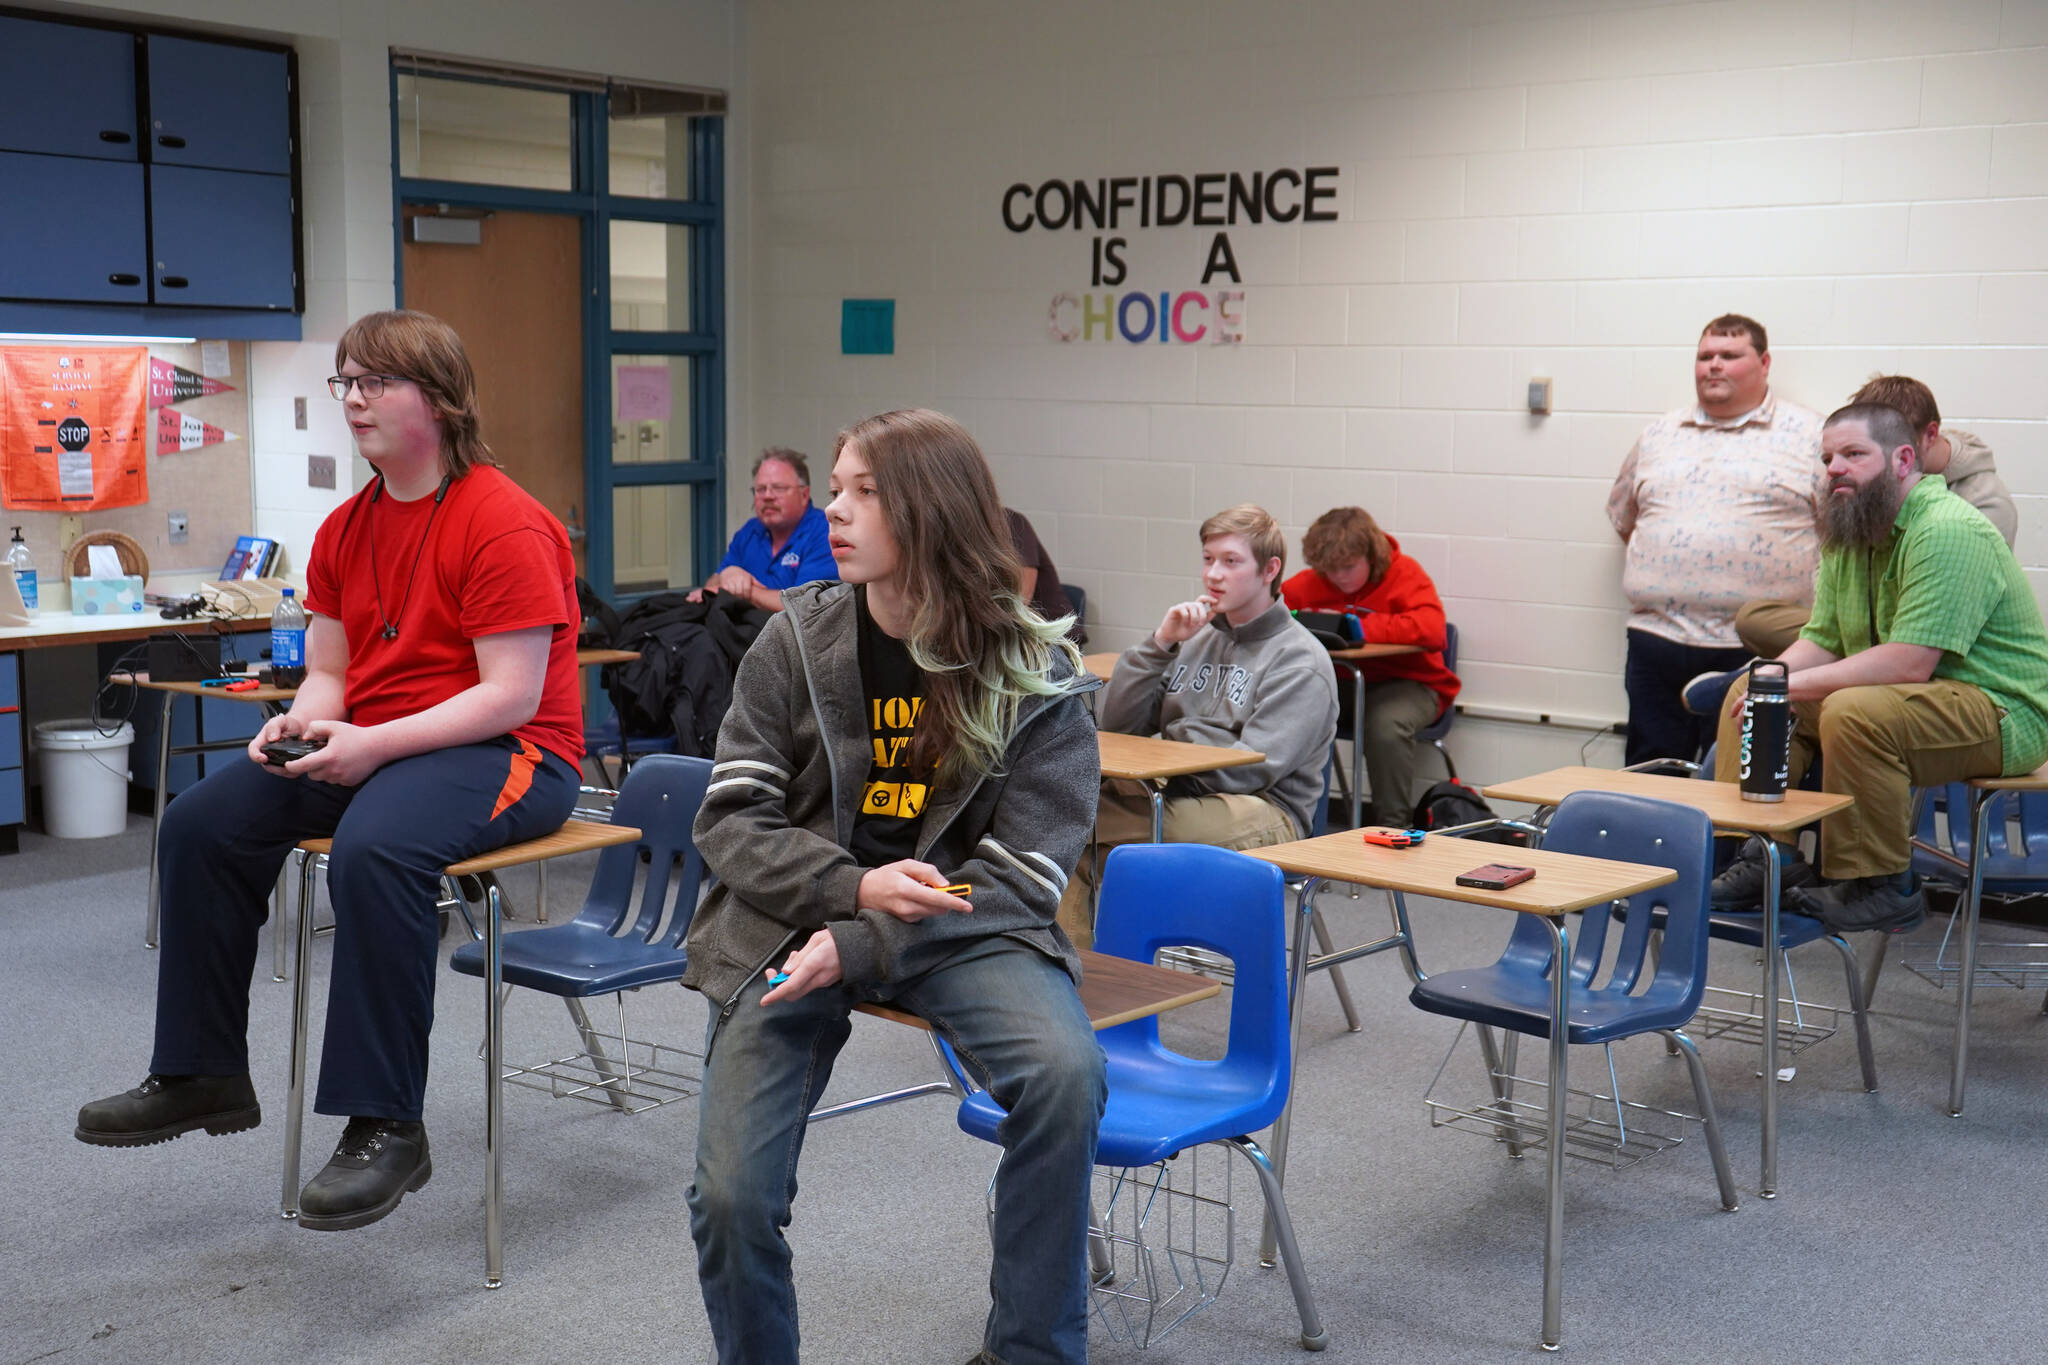 Players, coaches and parents watch as Kenai’s Boyd Lehmberg and Nikiski’s Lincoln Kimbell play the final round of competition for a Super Smash Bros. Ultimate match at Nikiski Middle/High School in Nikiski, Alaska, on Monday, Oct. 23, 2023. (Jake Dye/Peninsula Clarion)